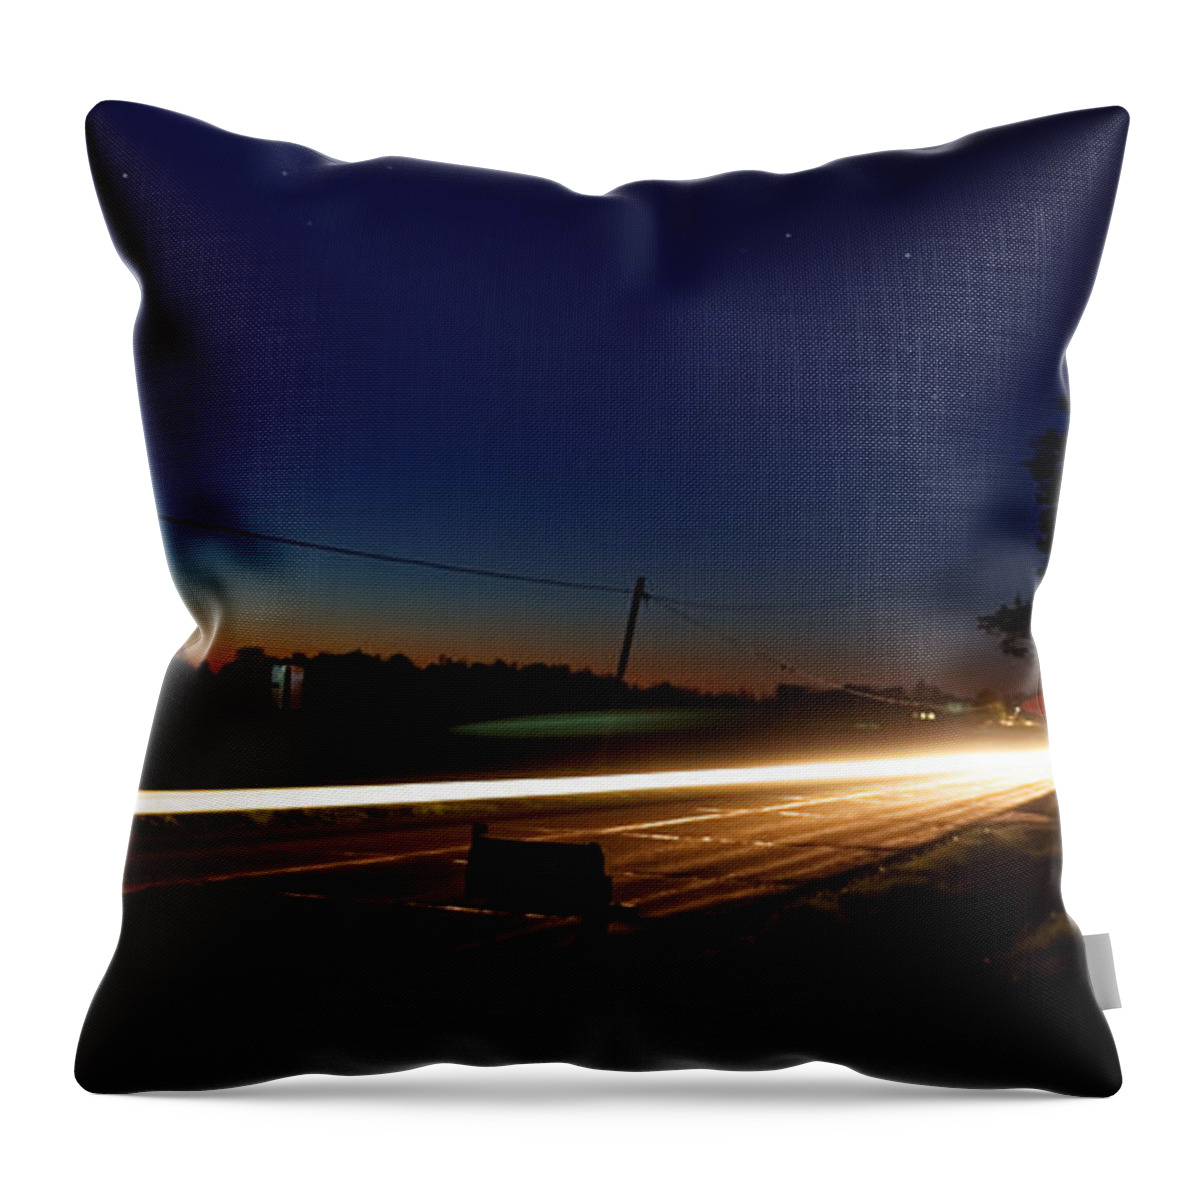 Auto Throw Pillow featuring the photograph Night Passing by Lars Lentz